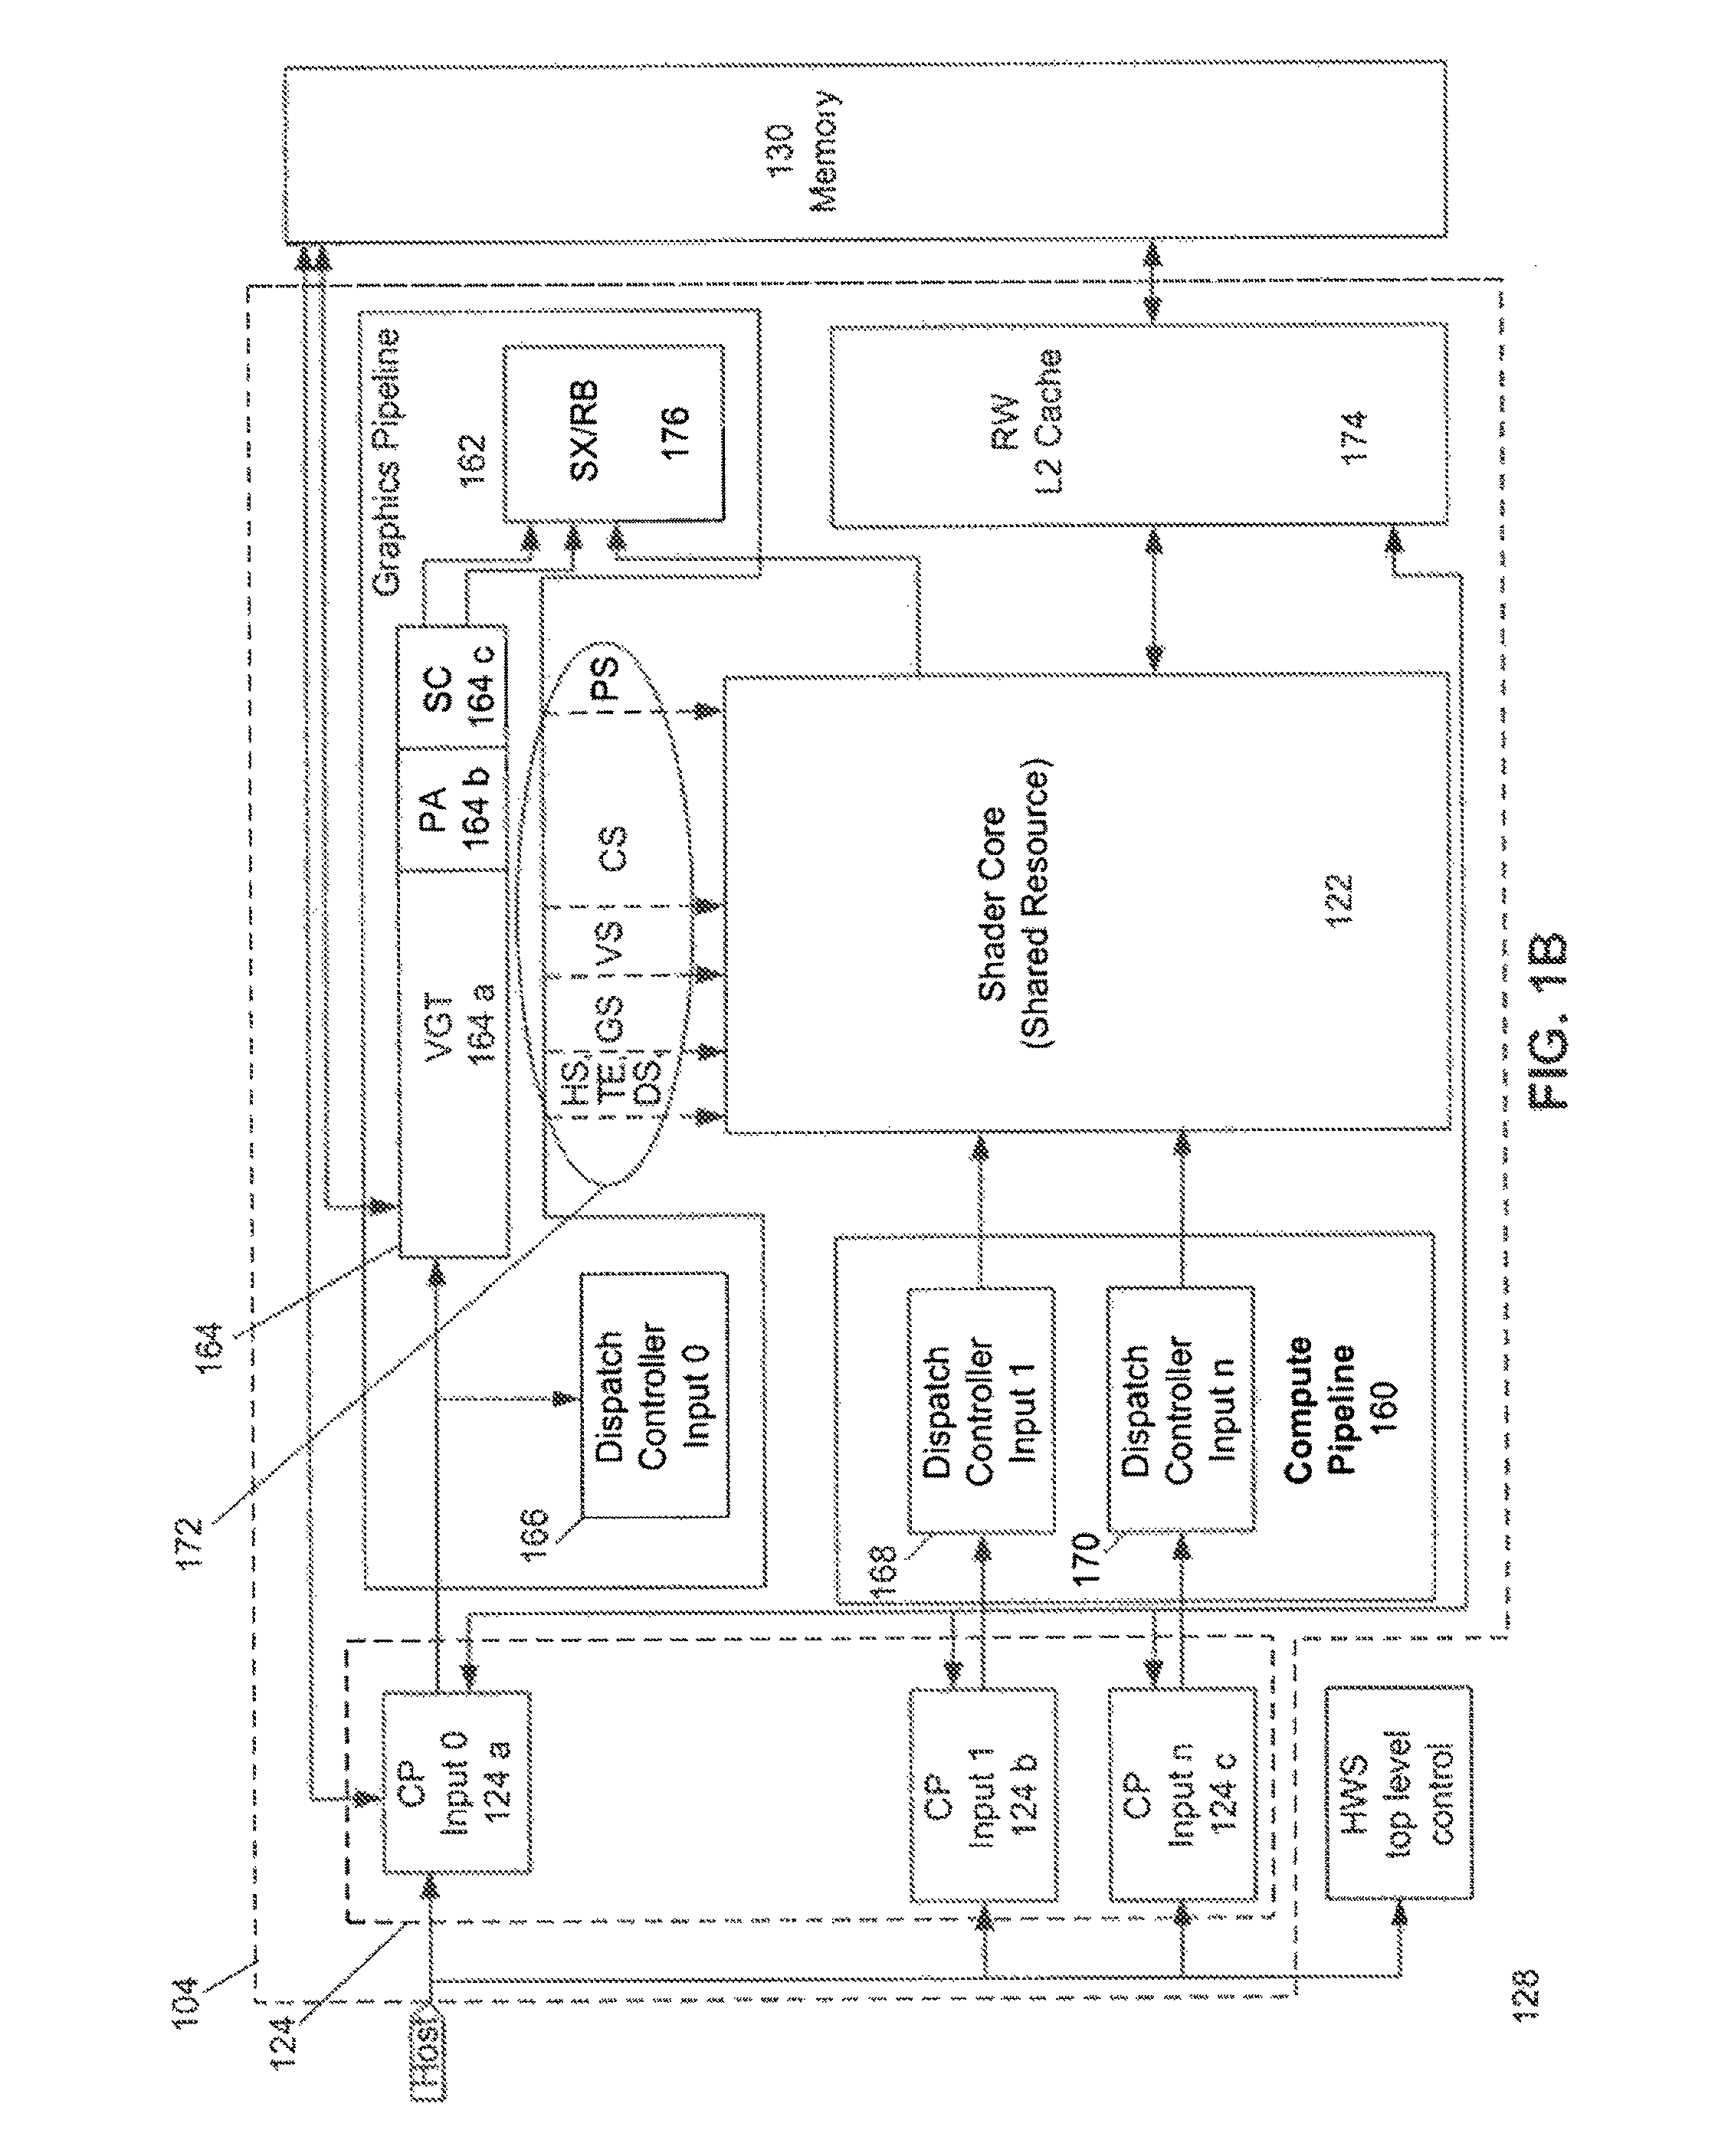 Method for urgency-based preemption of a process